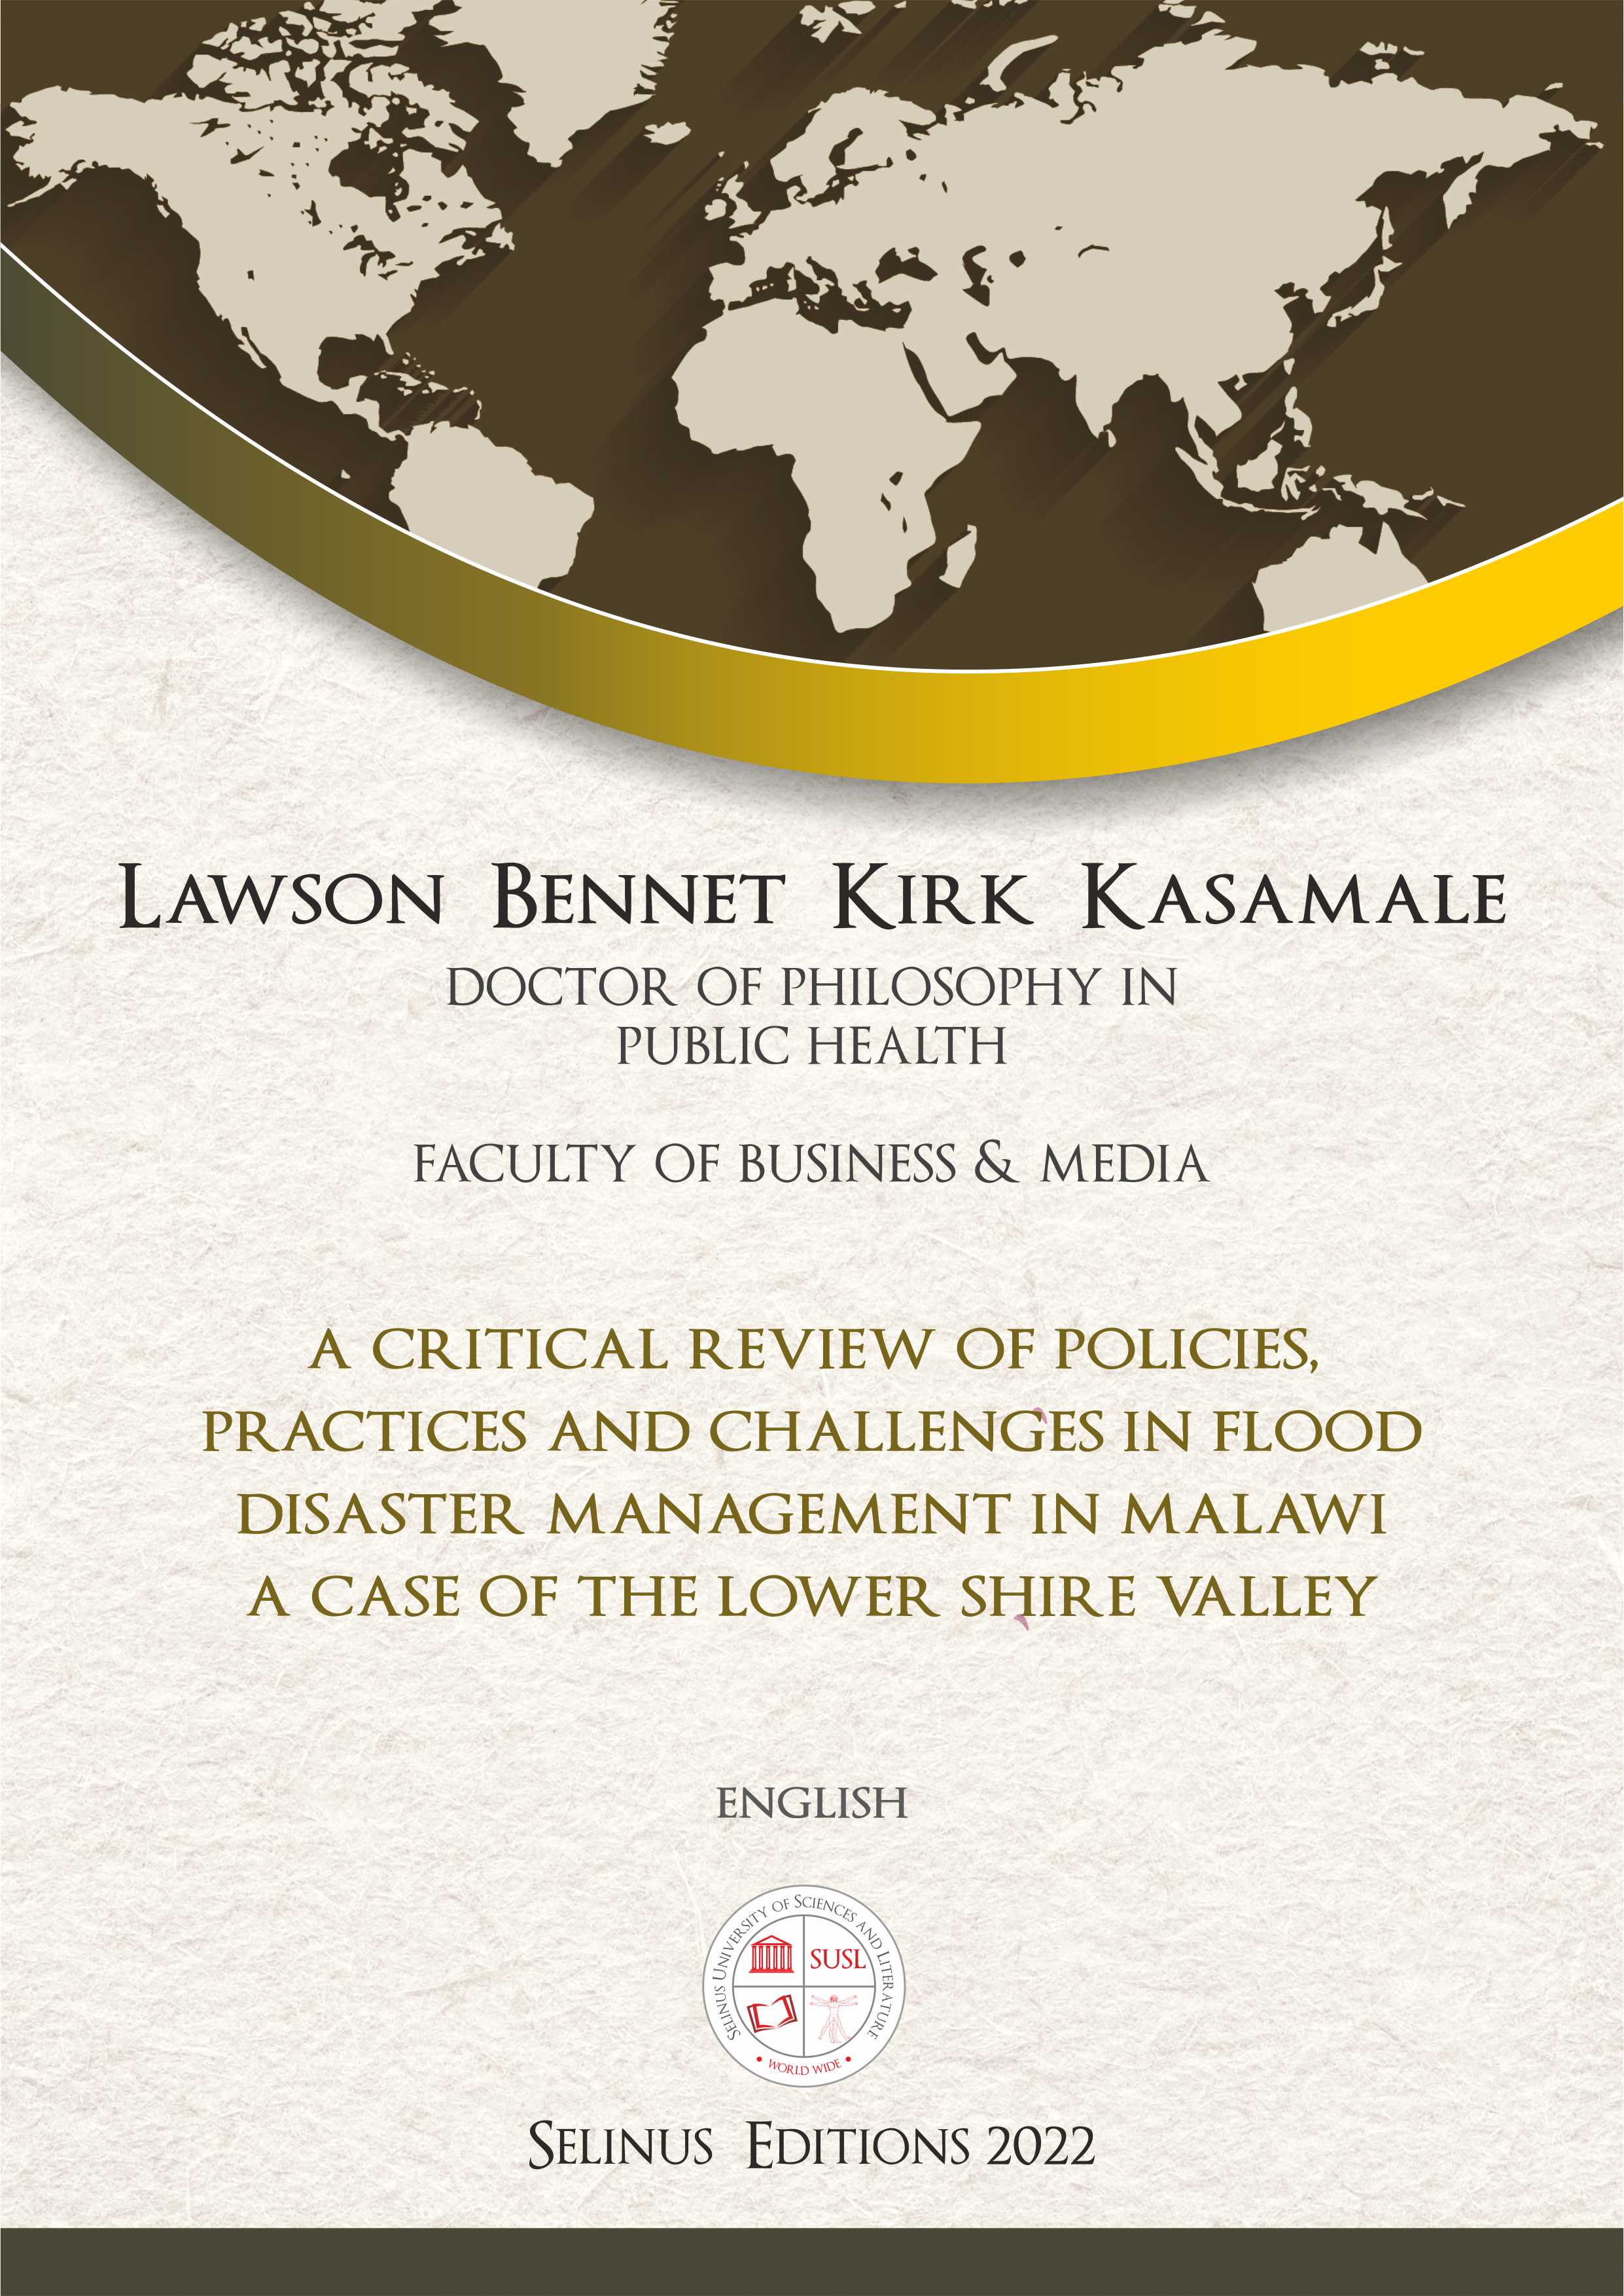 Thesis Lawson Bennet Kirk Kasamale